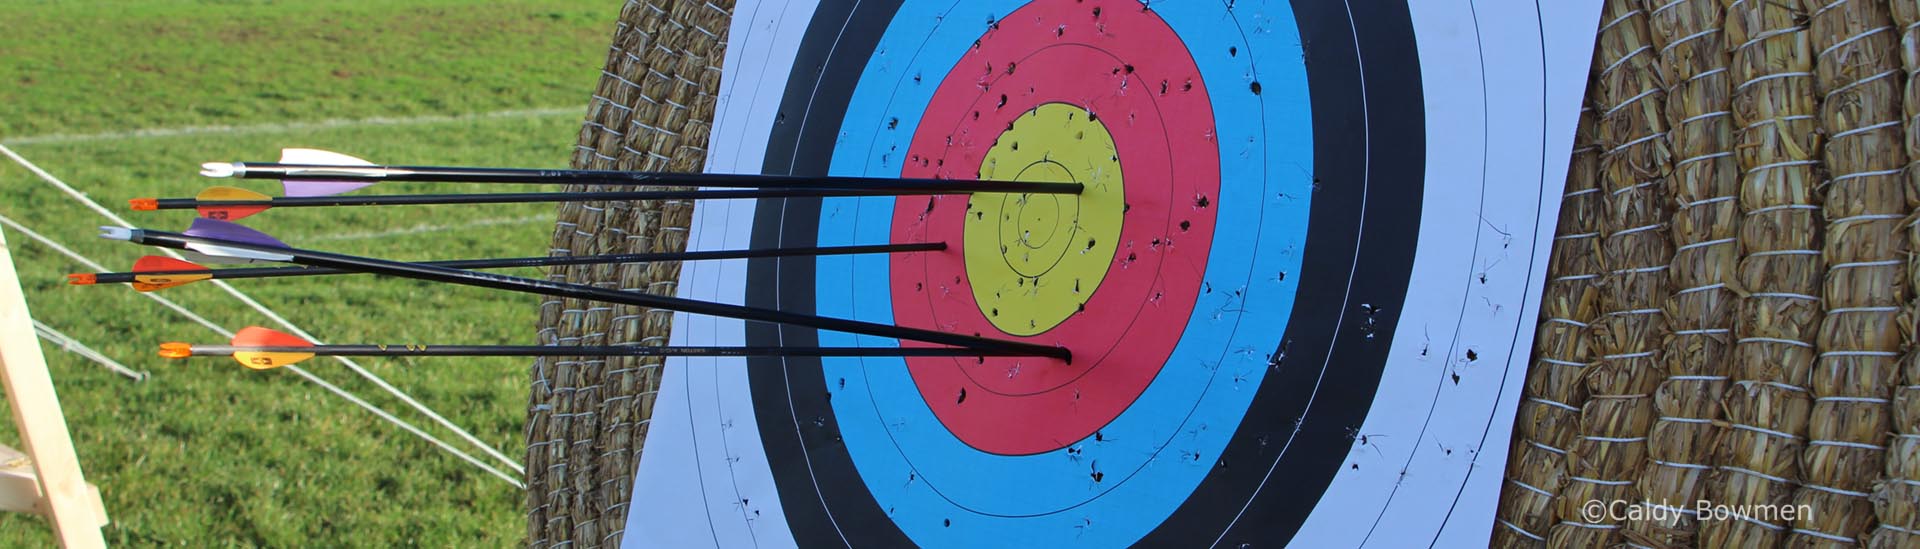 slideshow target face with arrows